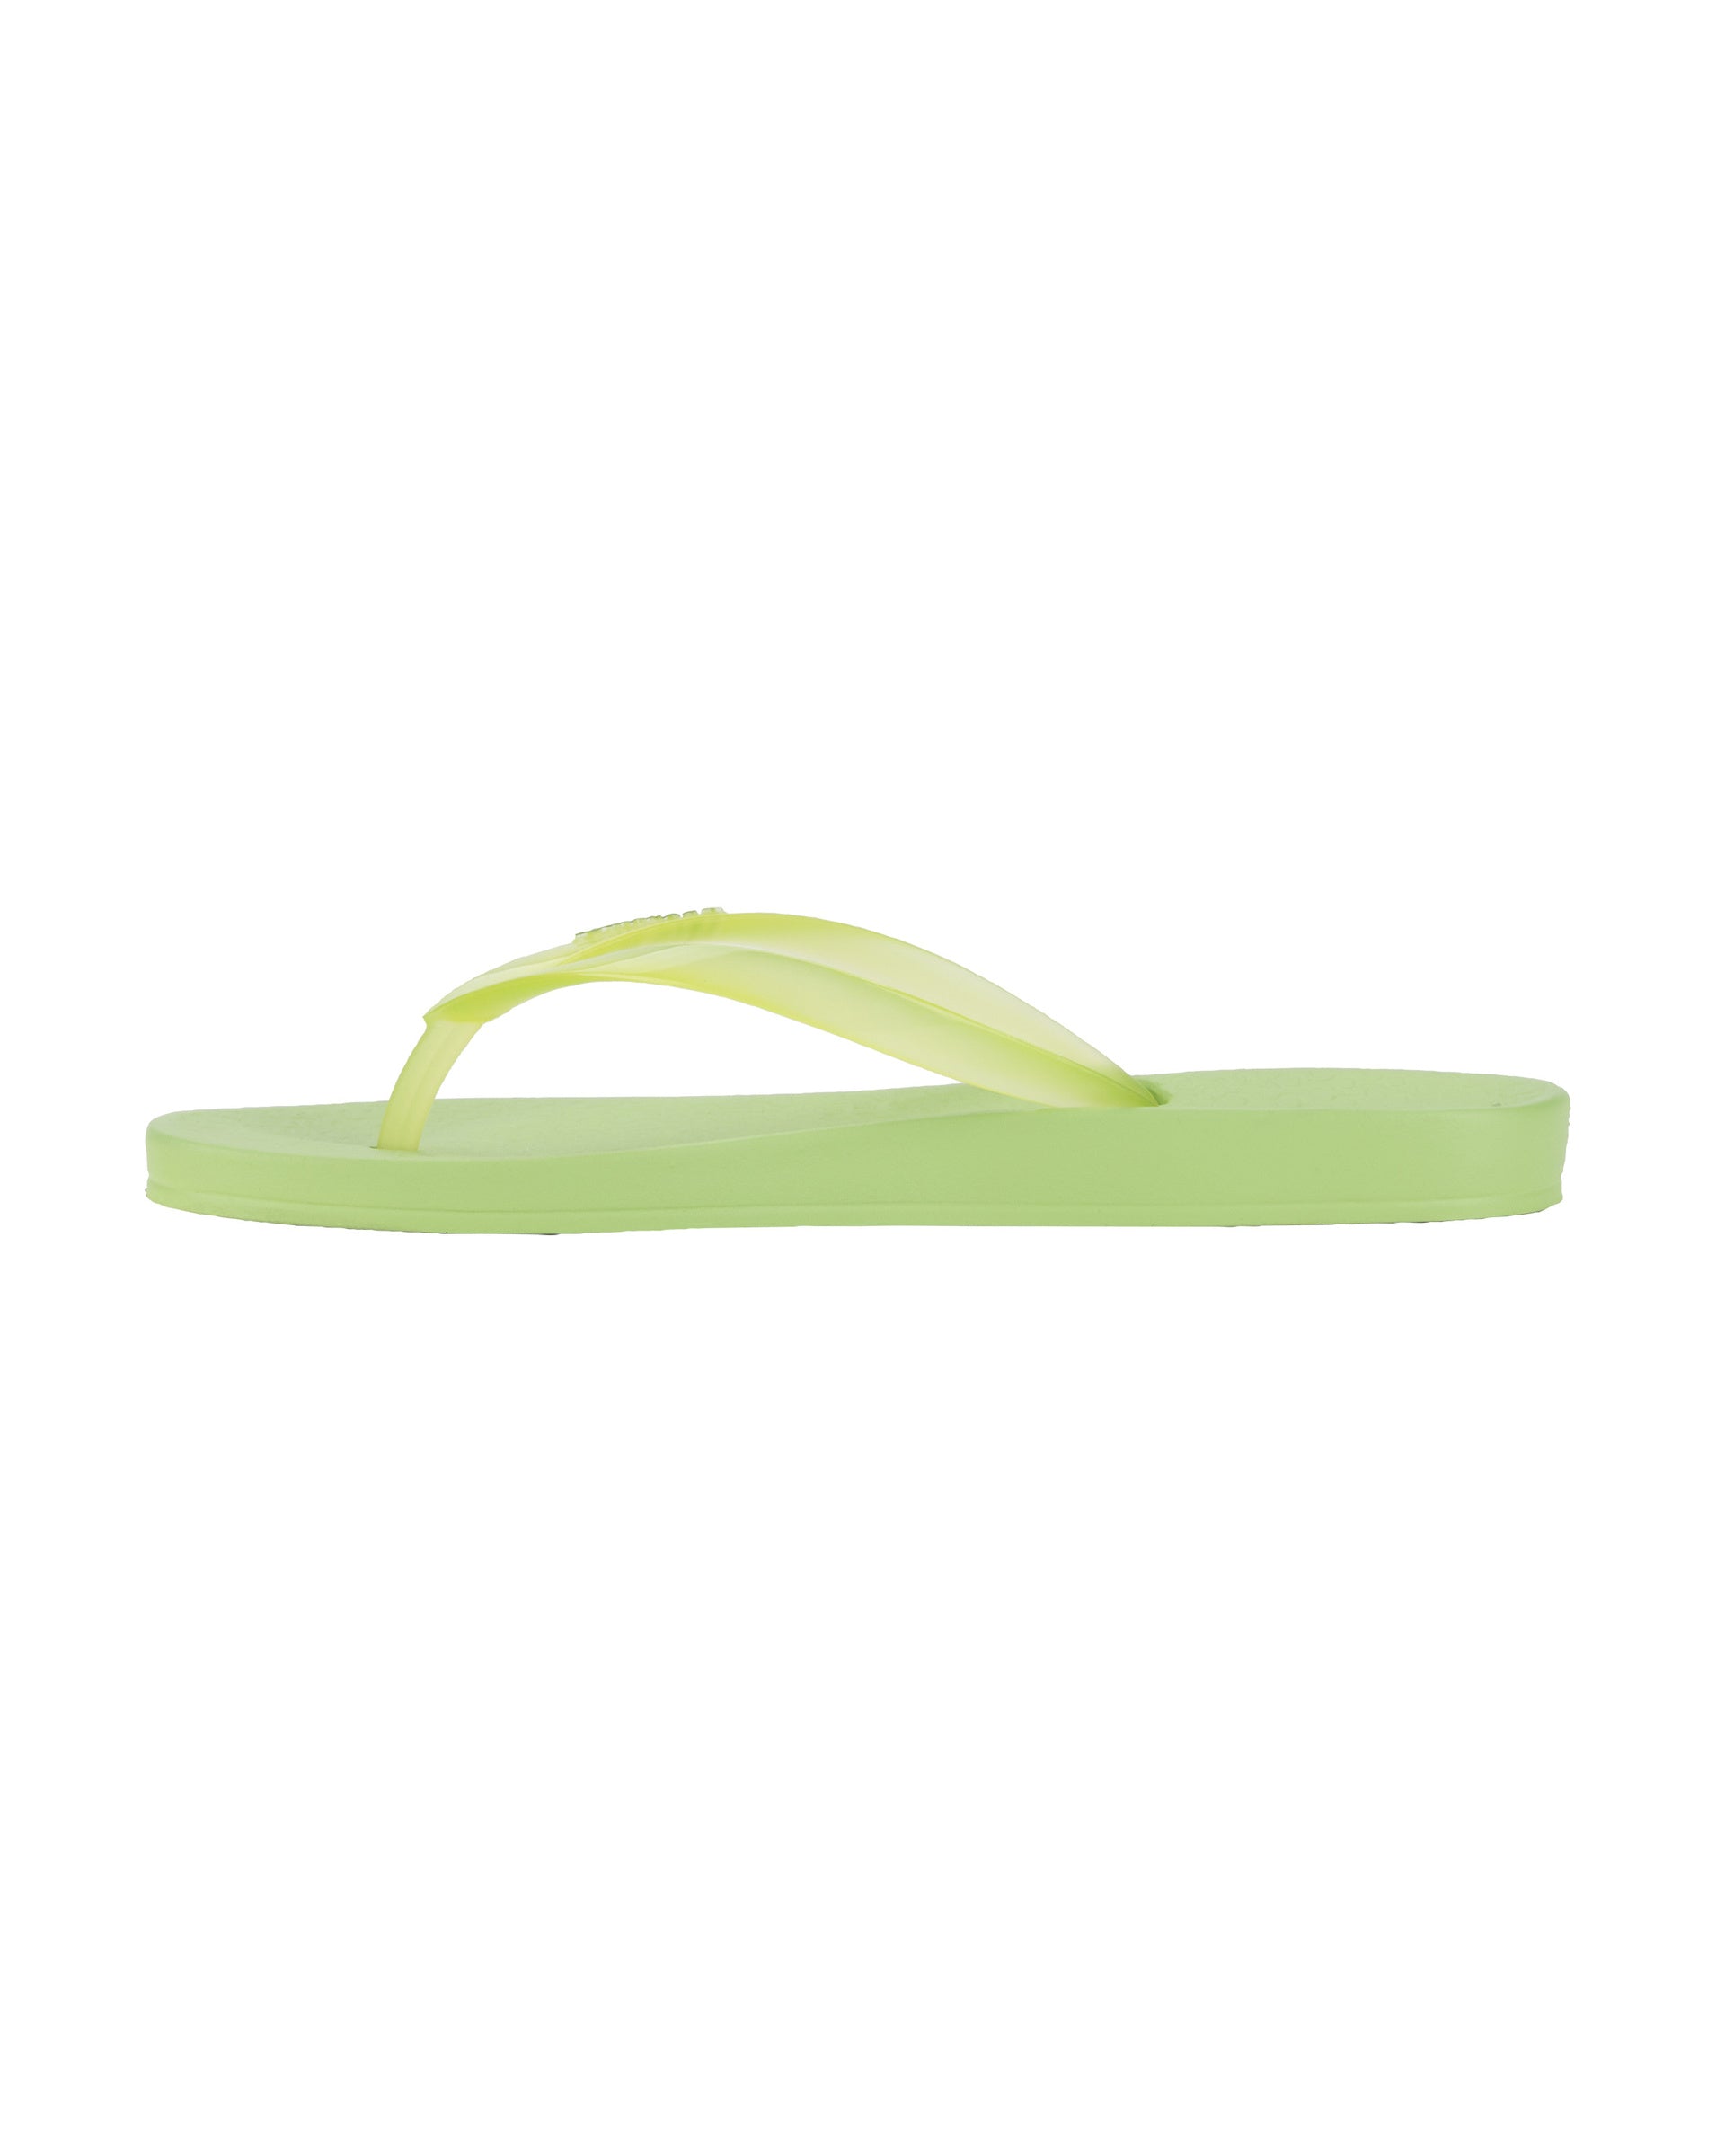 Inner side view of a green Ipanema Ana Connect women's flip flop with a clear green strap.